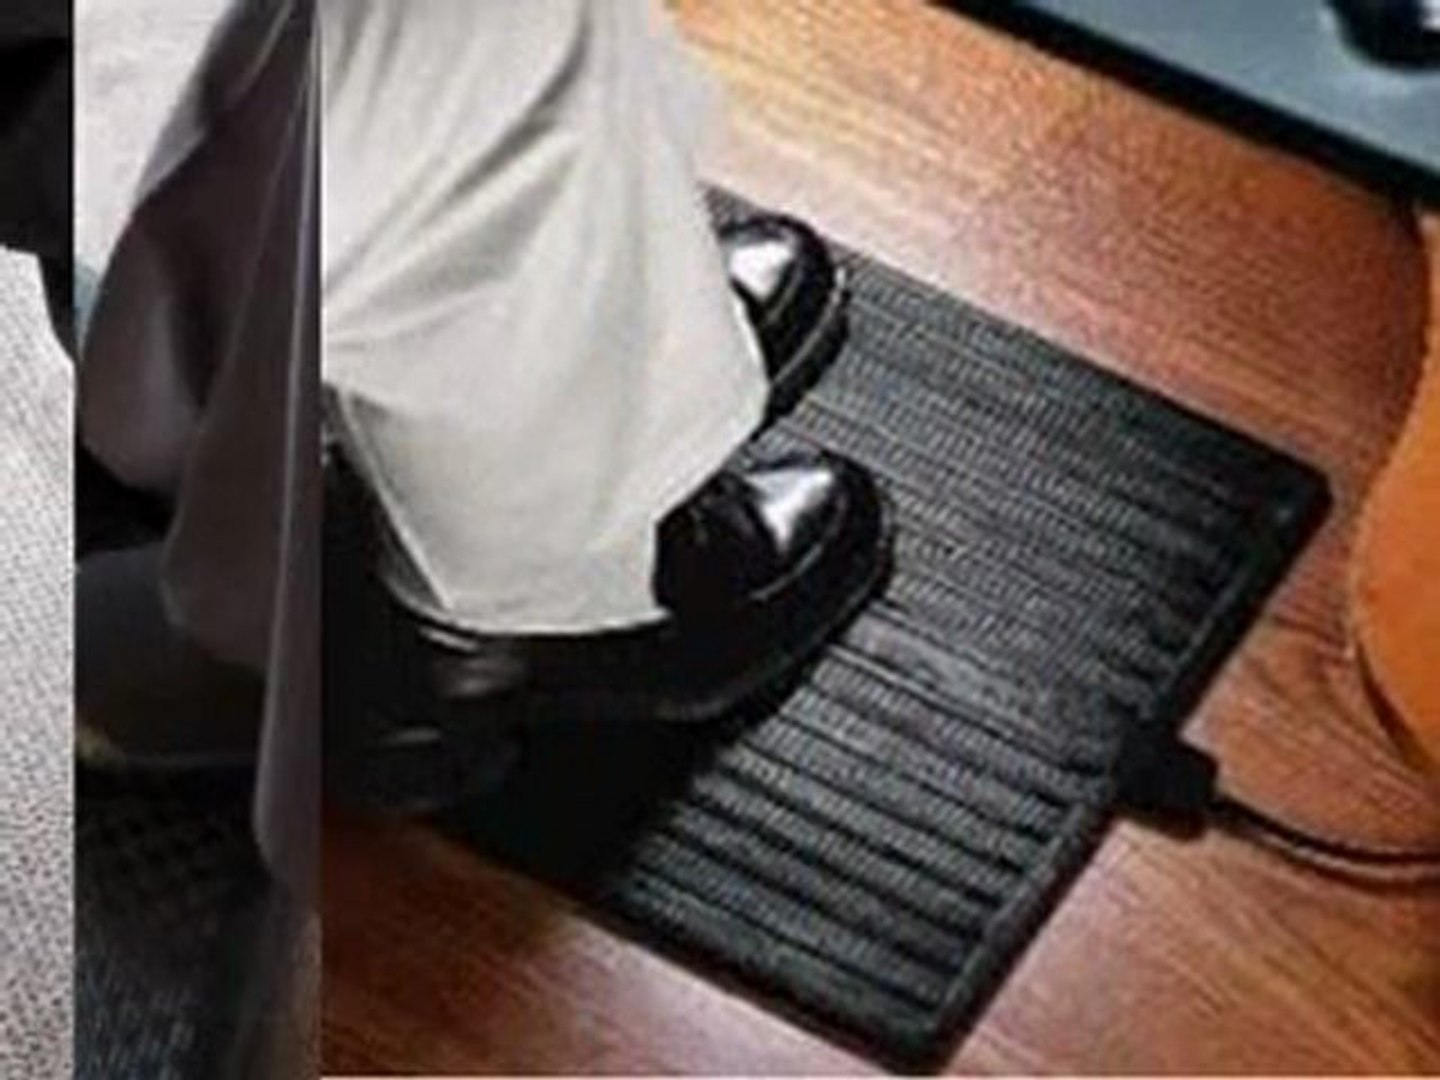 You Can Get A Heated Footrest For The Person Who Always Has Cold Feet